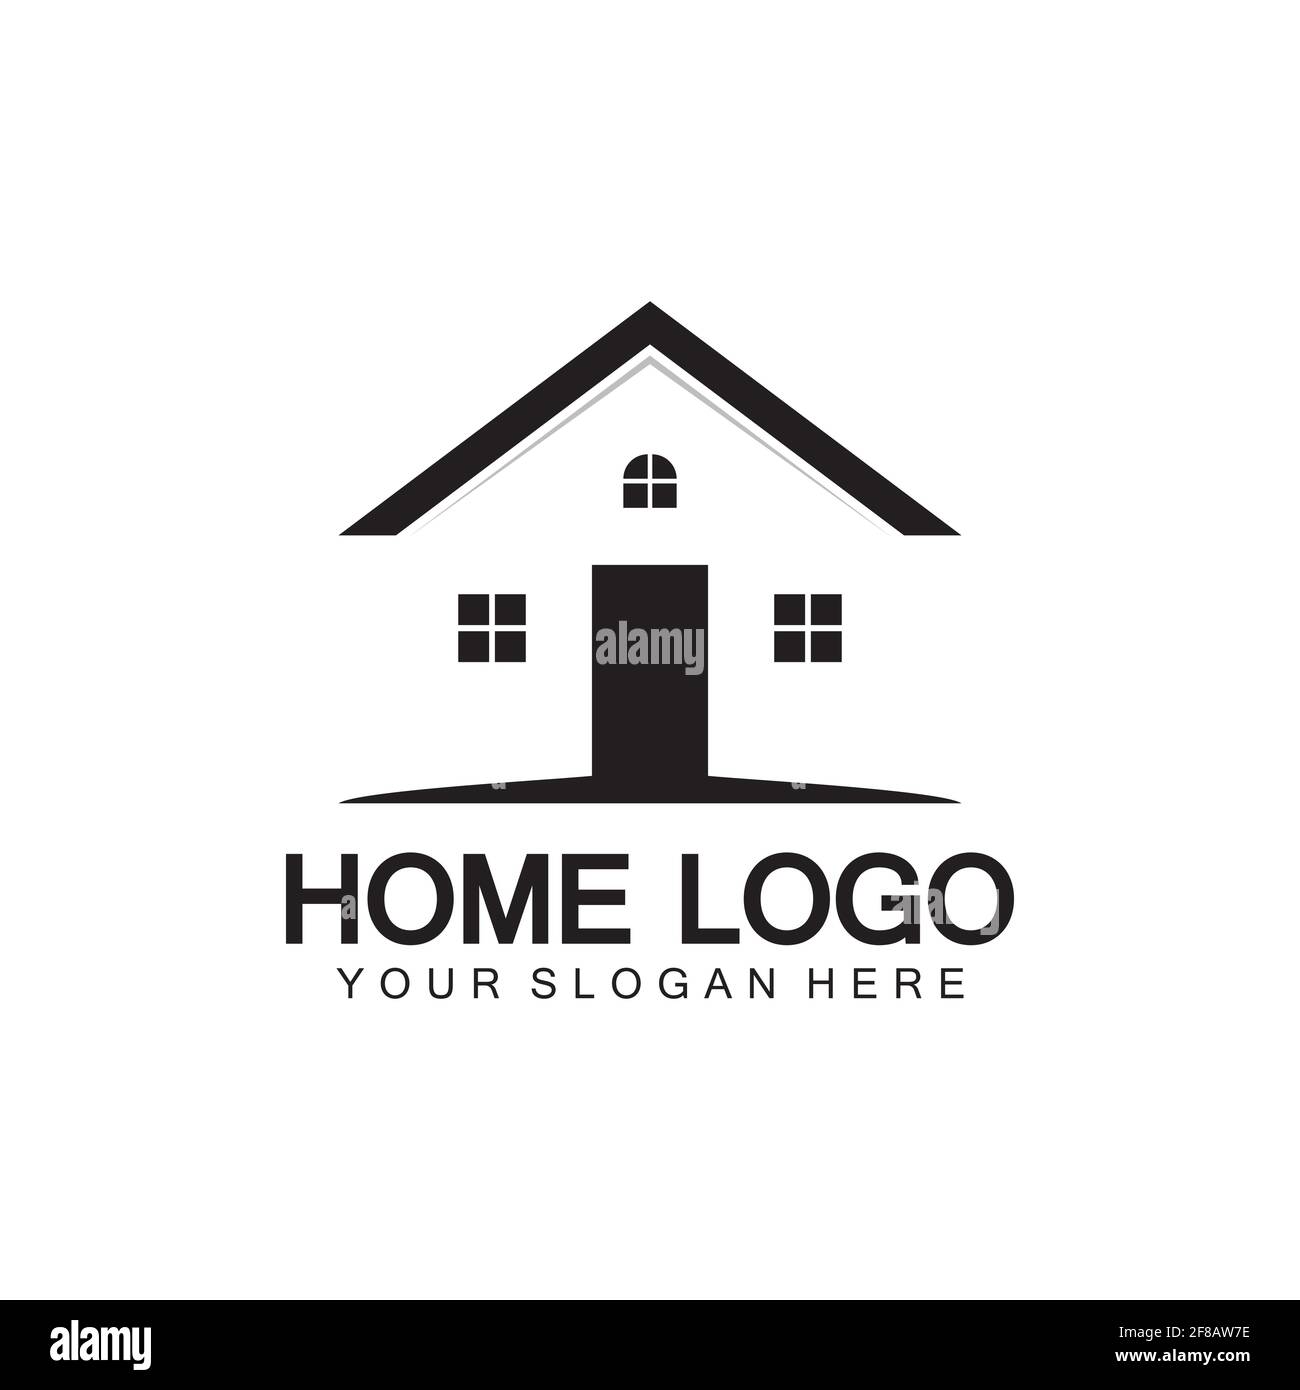 Home logo icon vector illustration design template.Home and house ...